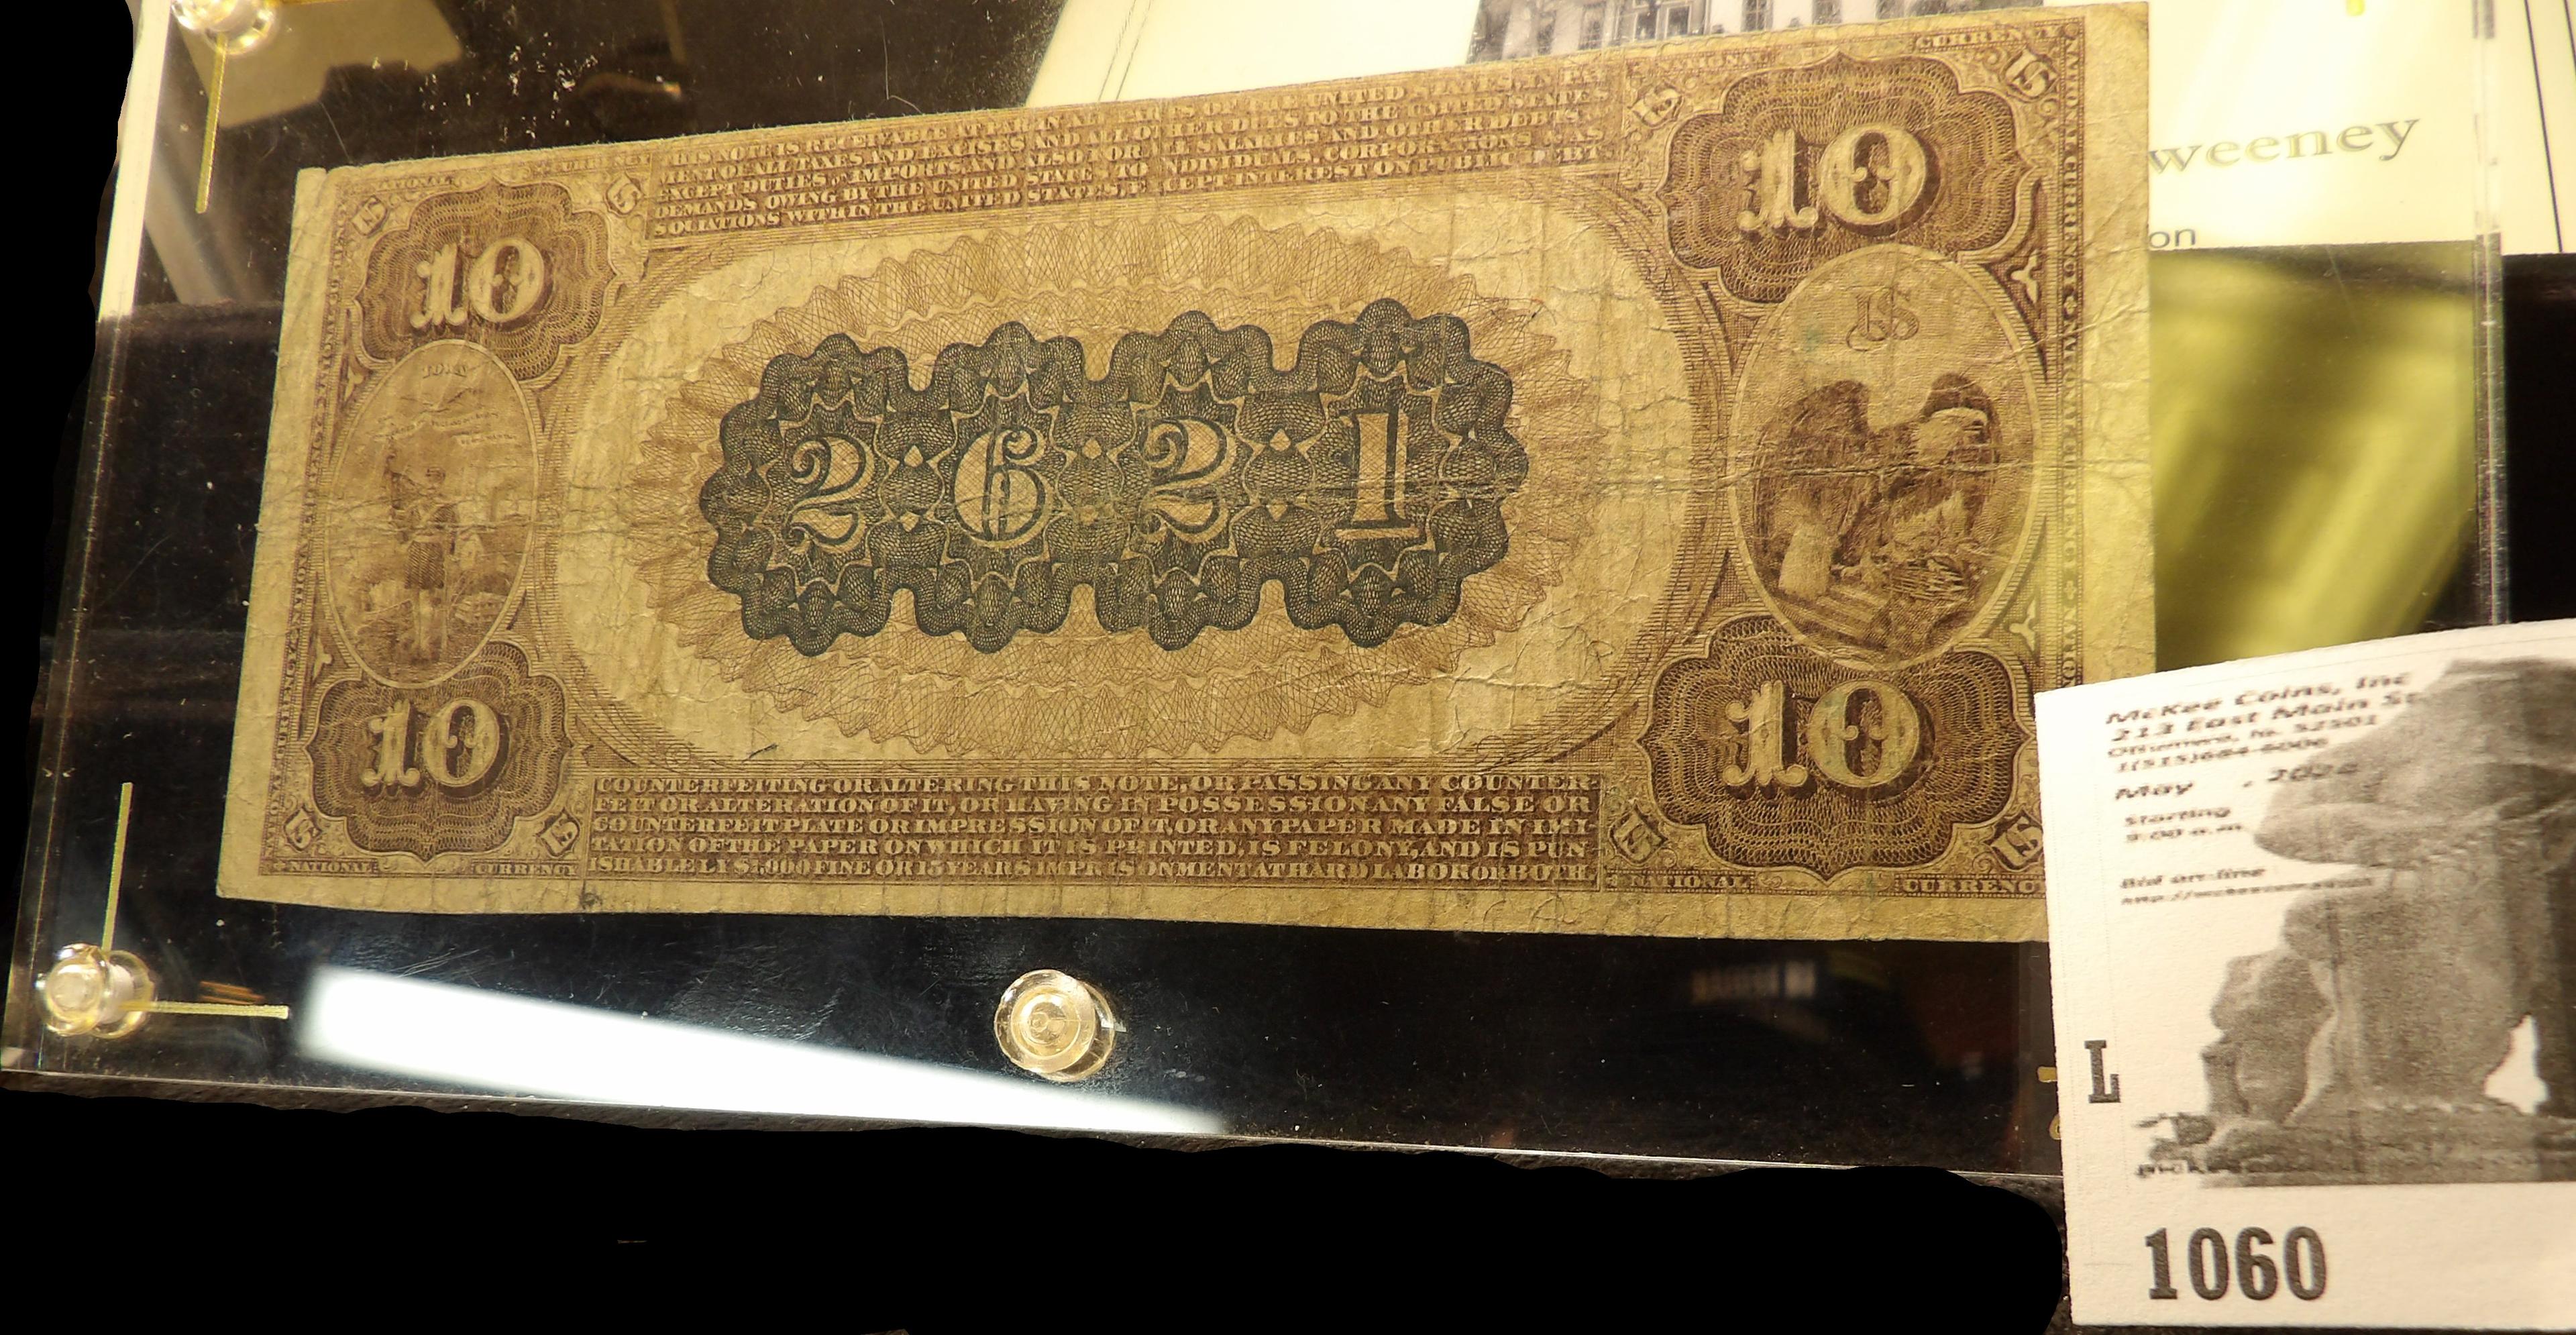 Series 1882 $10 Brown Back National Currency The Ottumwa National Bank State of Iowa, Second Charter